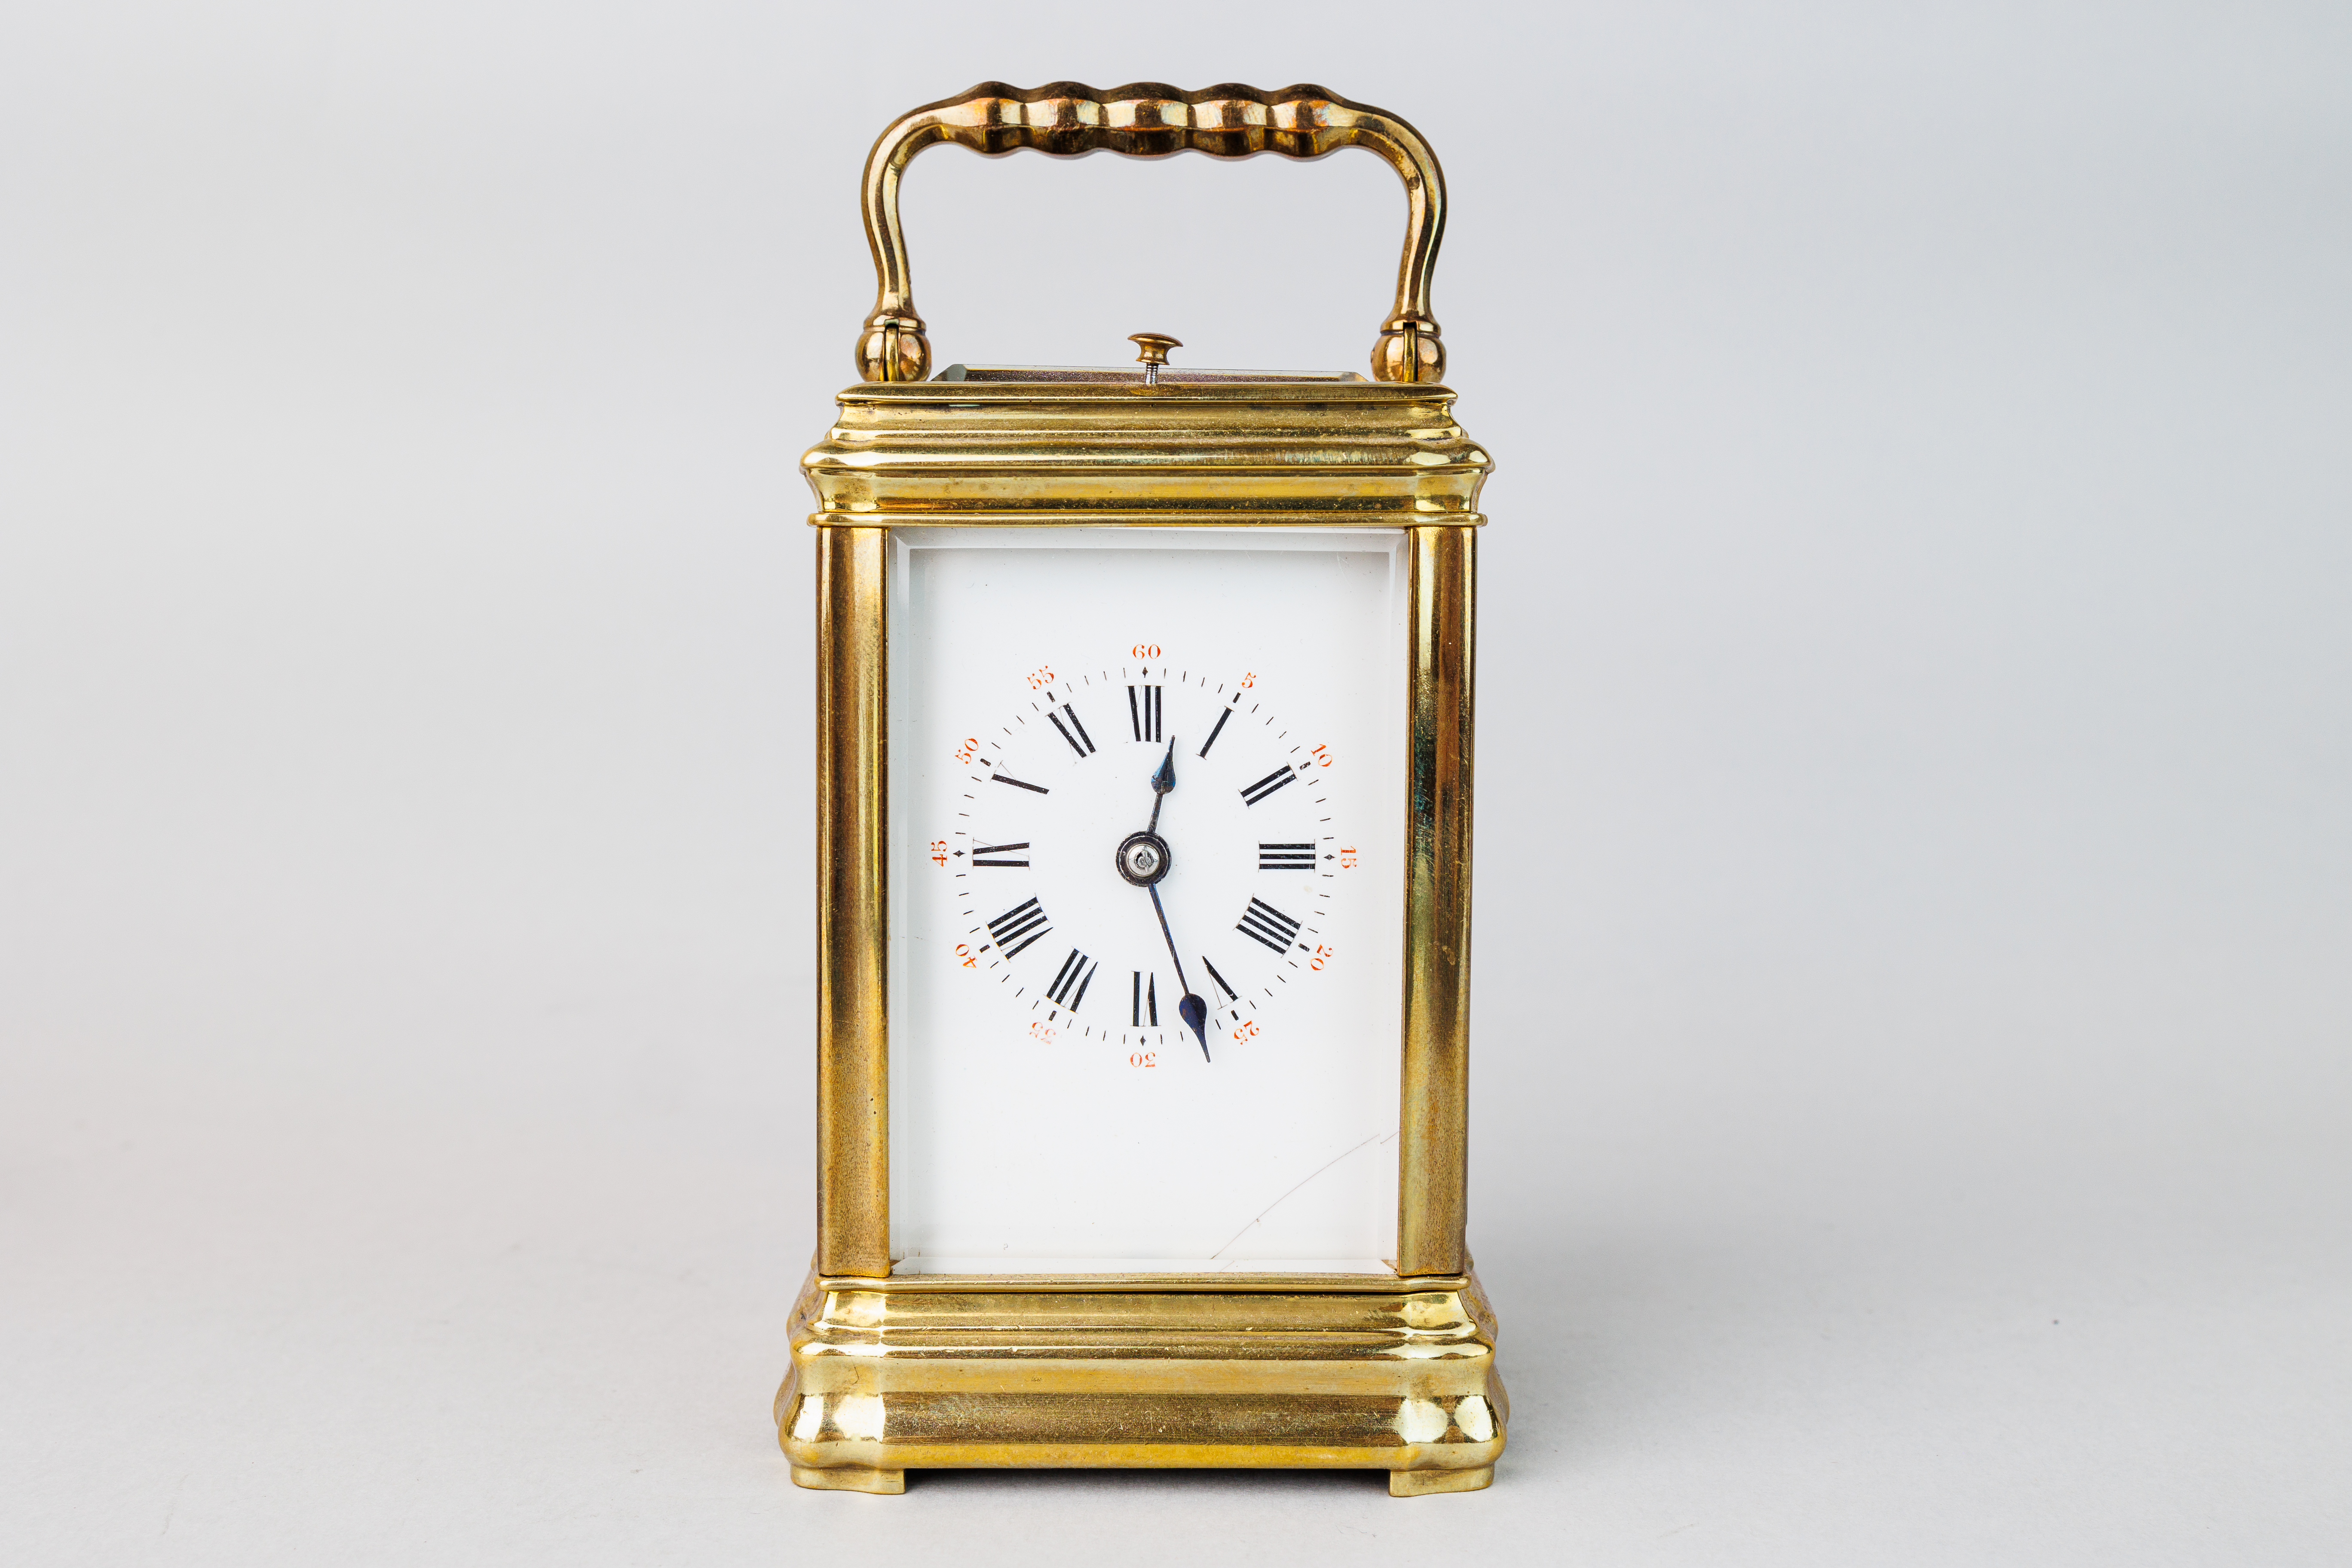 Miniature brass carriage clock in case - Image 13 of 21